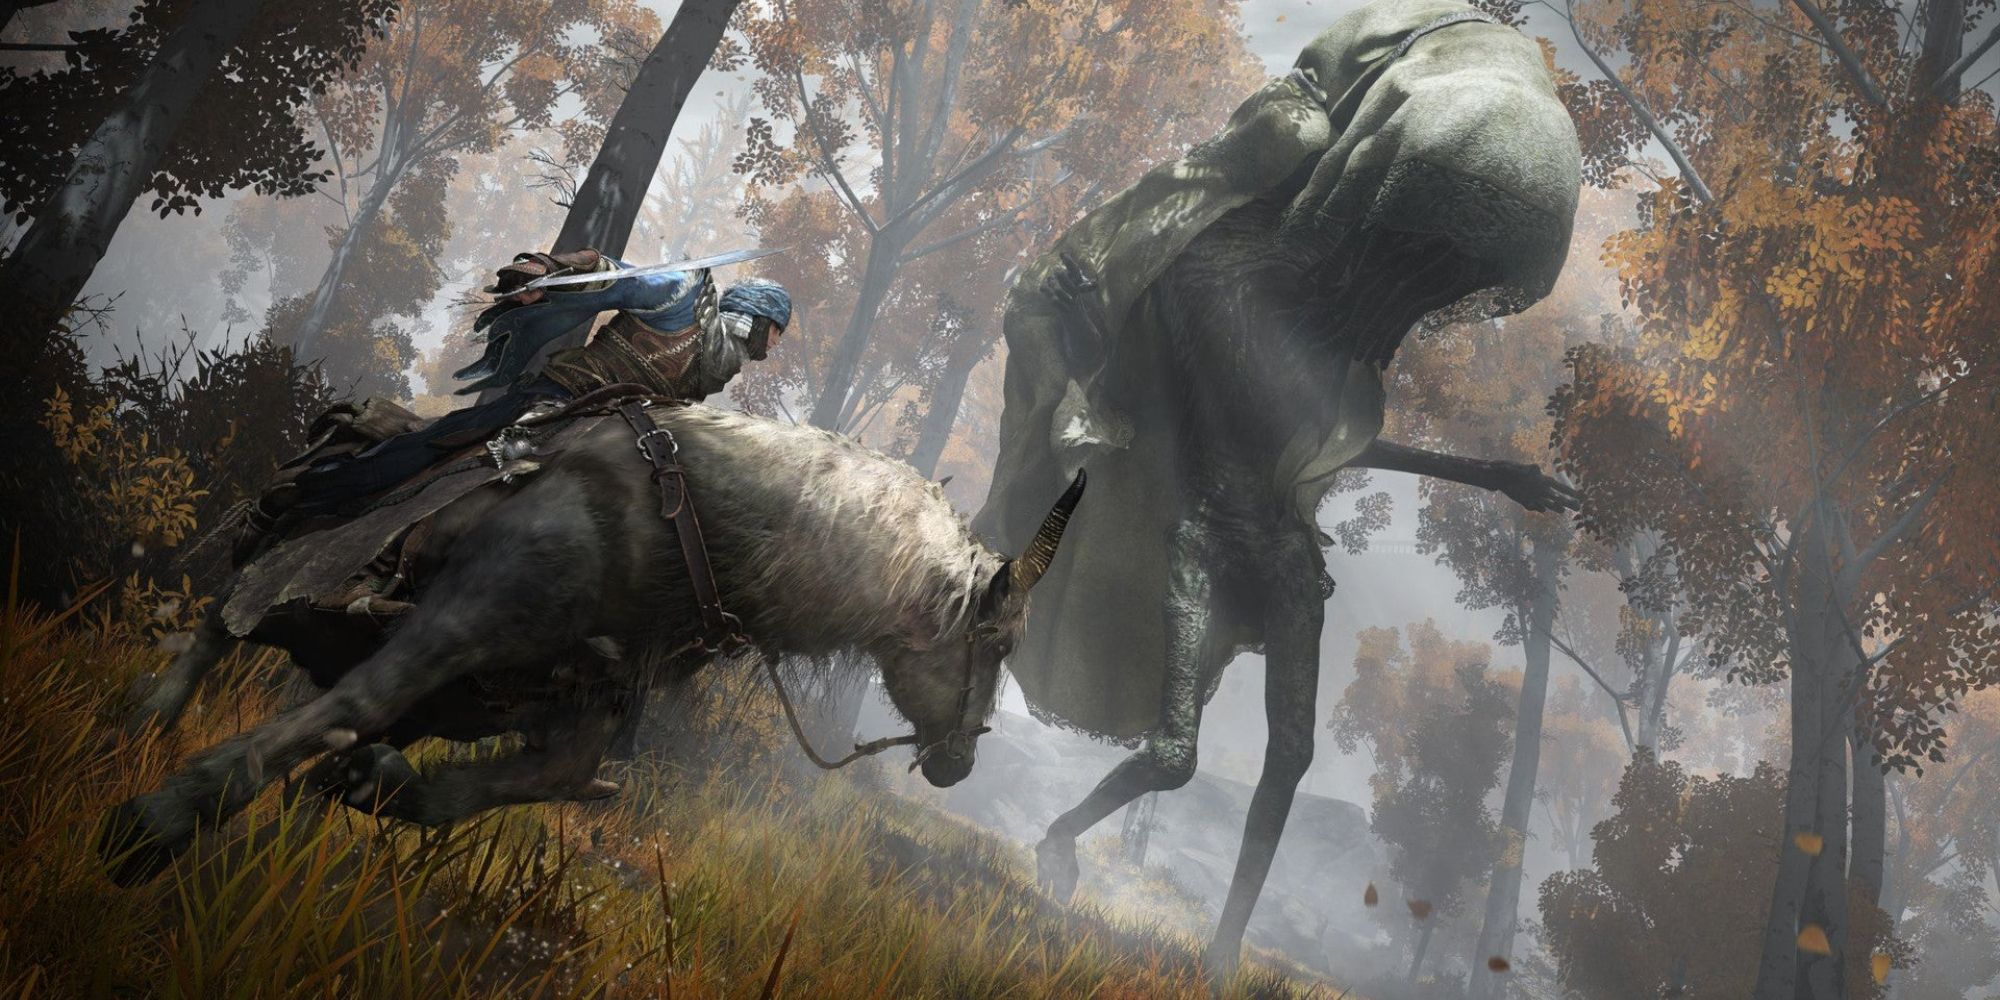 Elden Ring character on a horse attacking an enemy